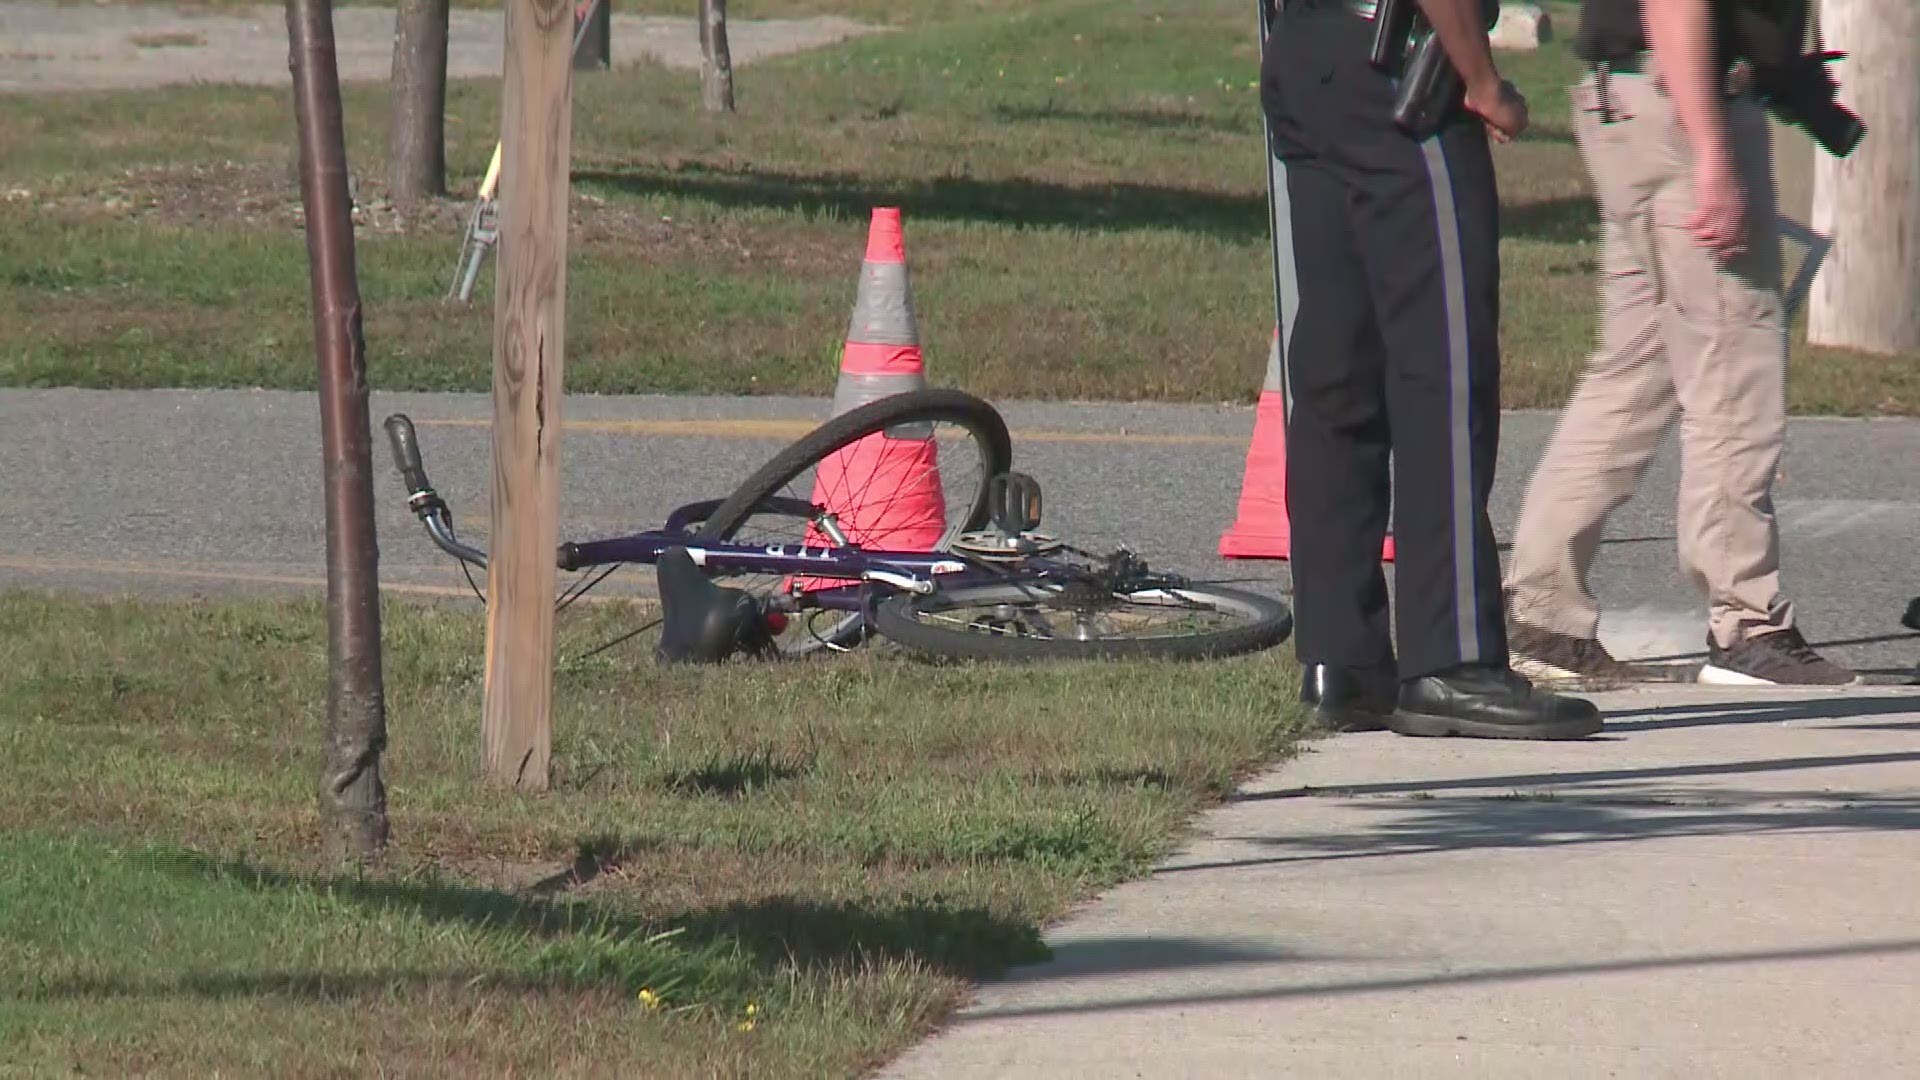 Police identified her Friday evening after asking the public for assistance the bicyclist.